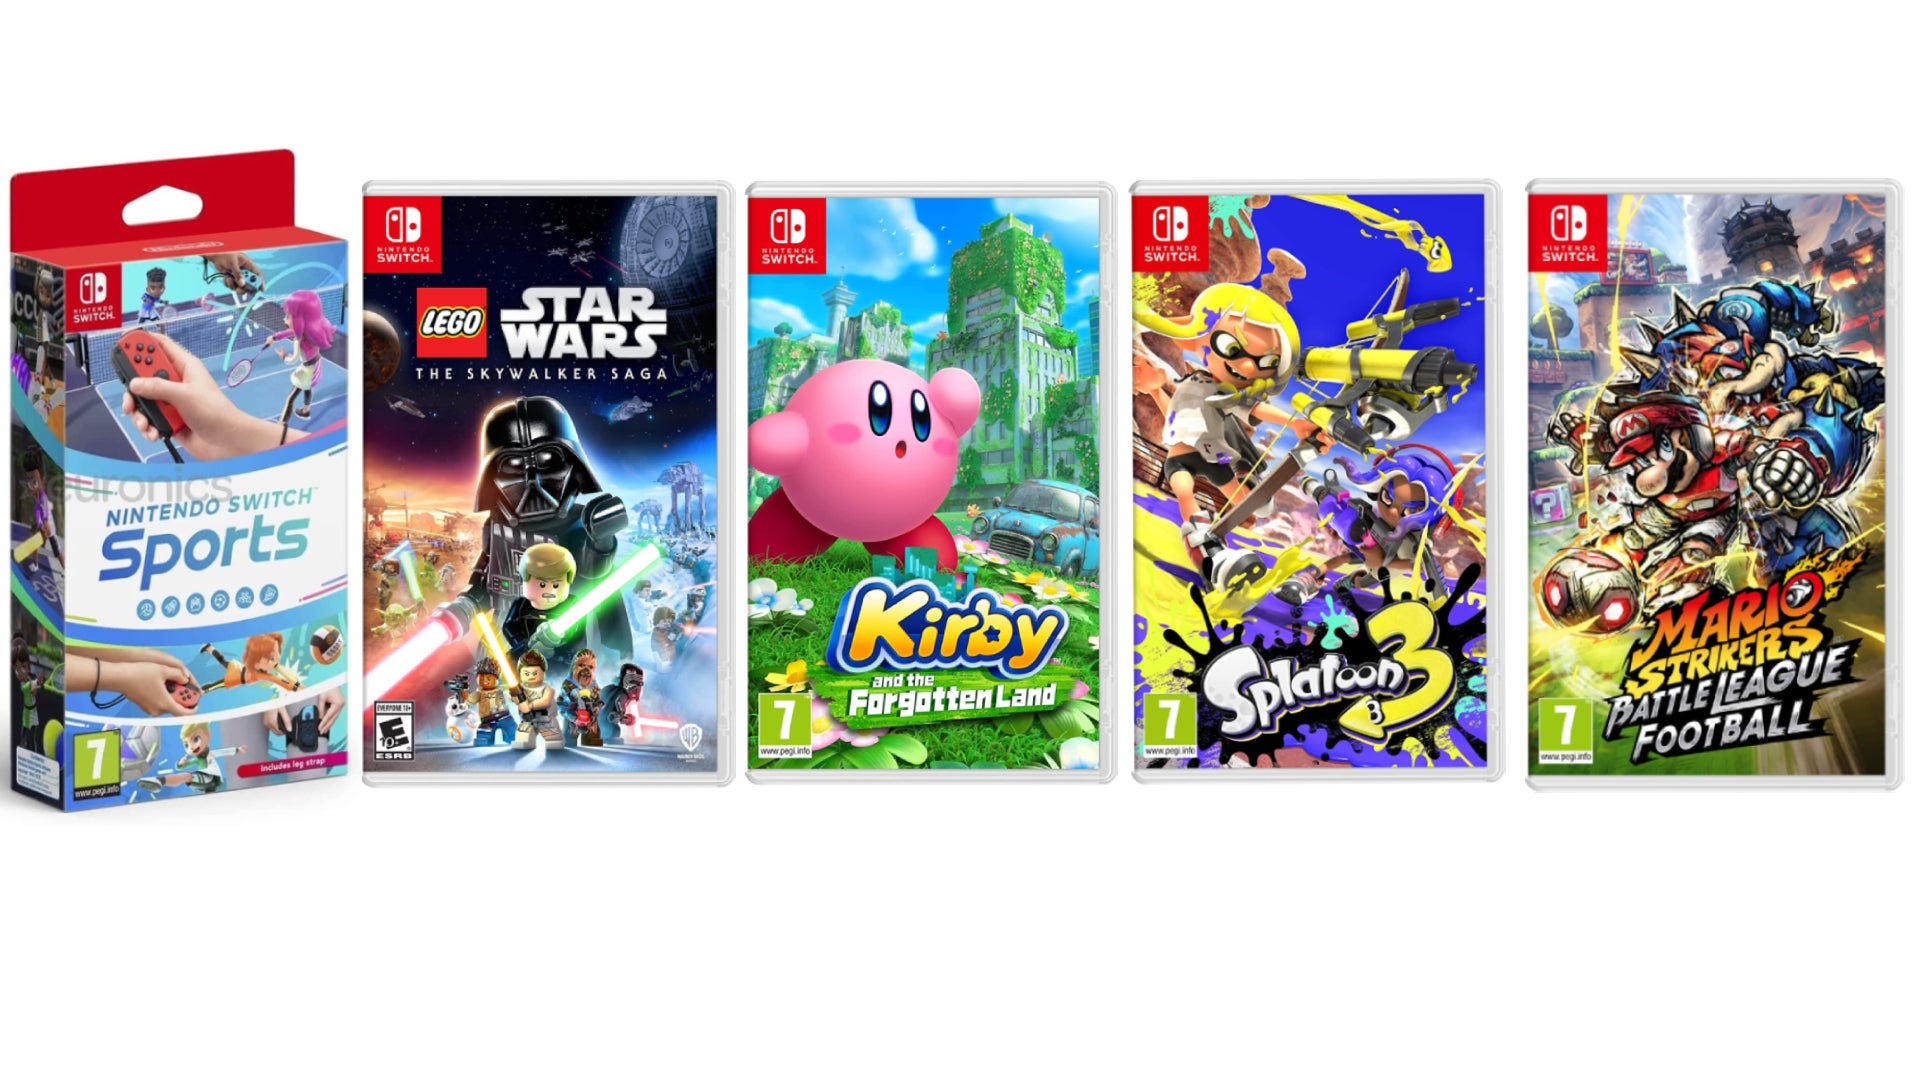 Image for Save up to 26 per cent on select Nintendo Switch games at Amazon